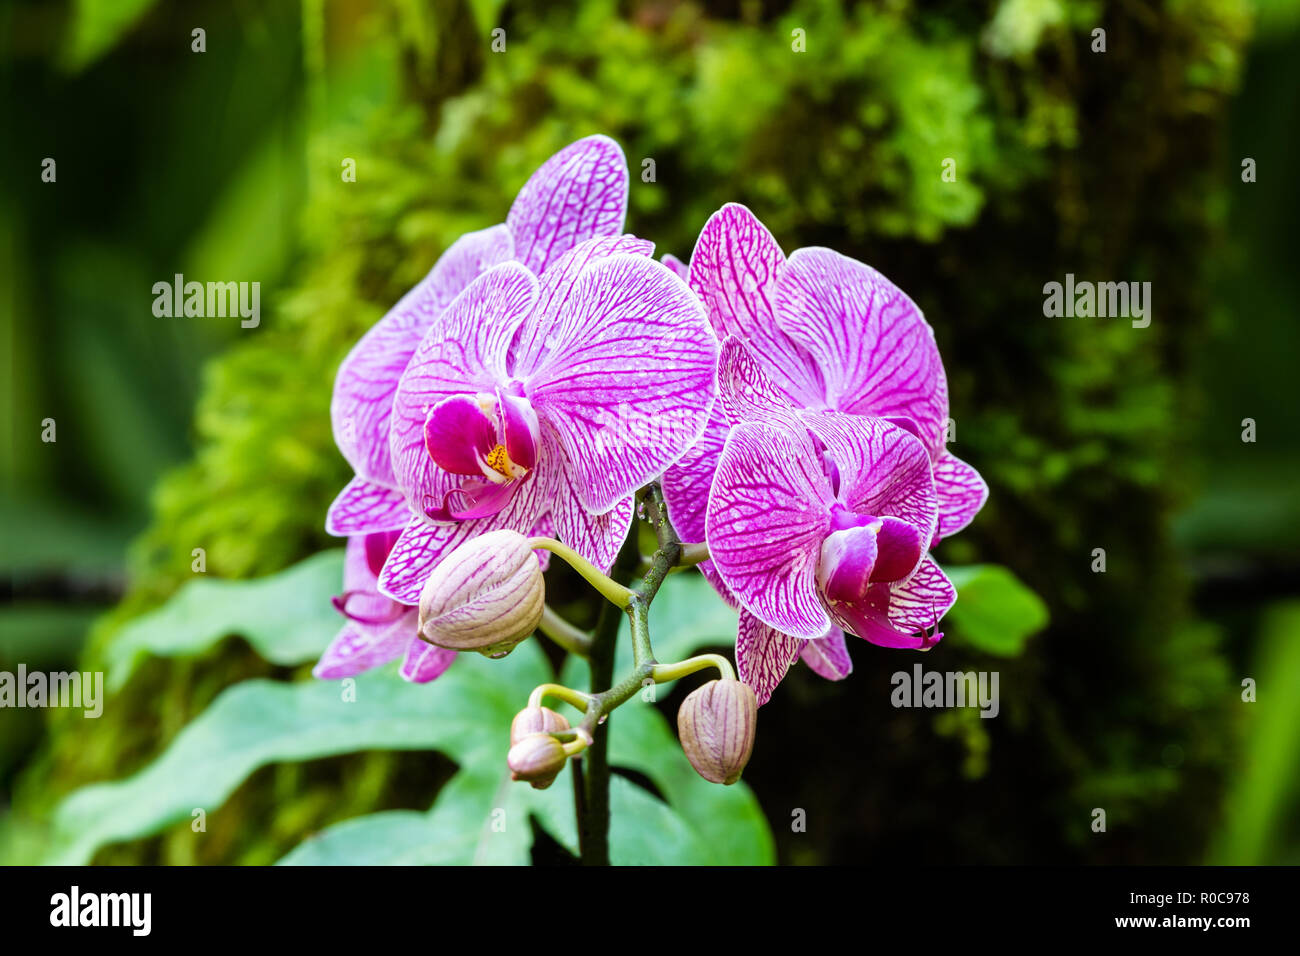 Bunch of phalaenopsis (moth shaped) orchids at Botanical garden in Hilo, Hawaii. Pink striped petals; ferns and green leaves in background. Stock Photo